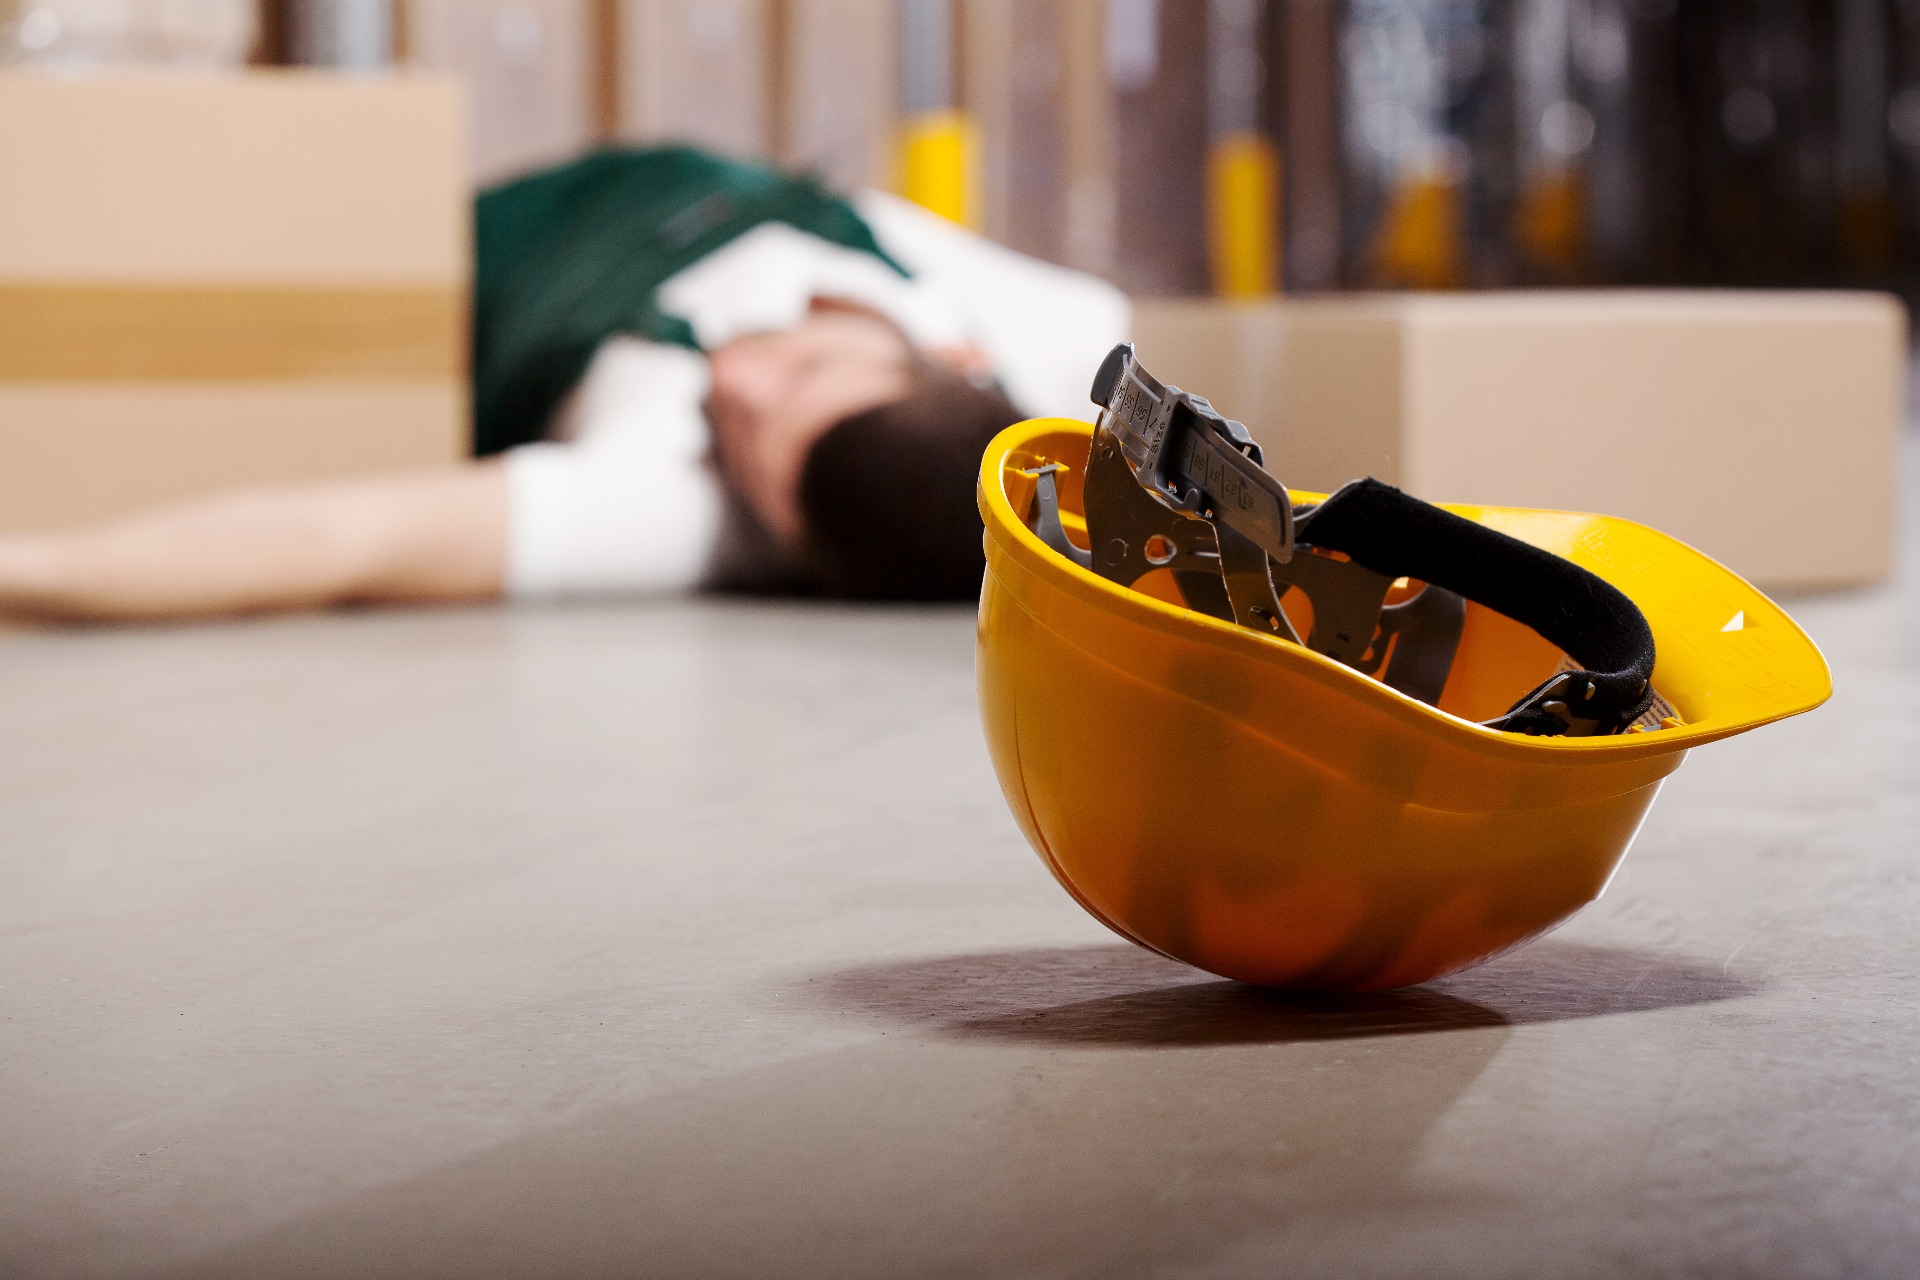 Male employee on the floor after a fall at work. His hard-hat has fallen off